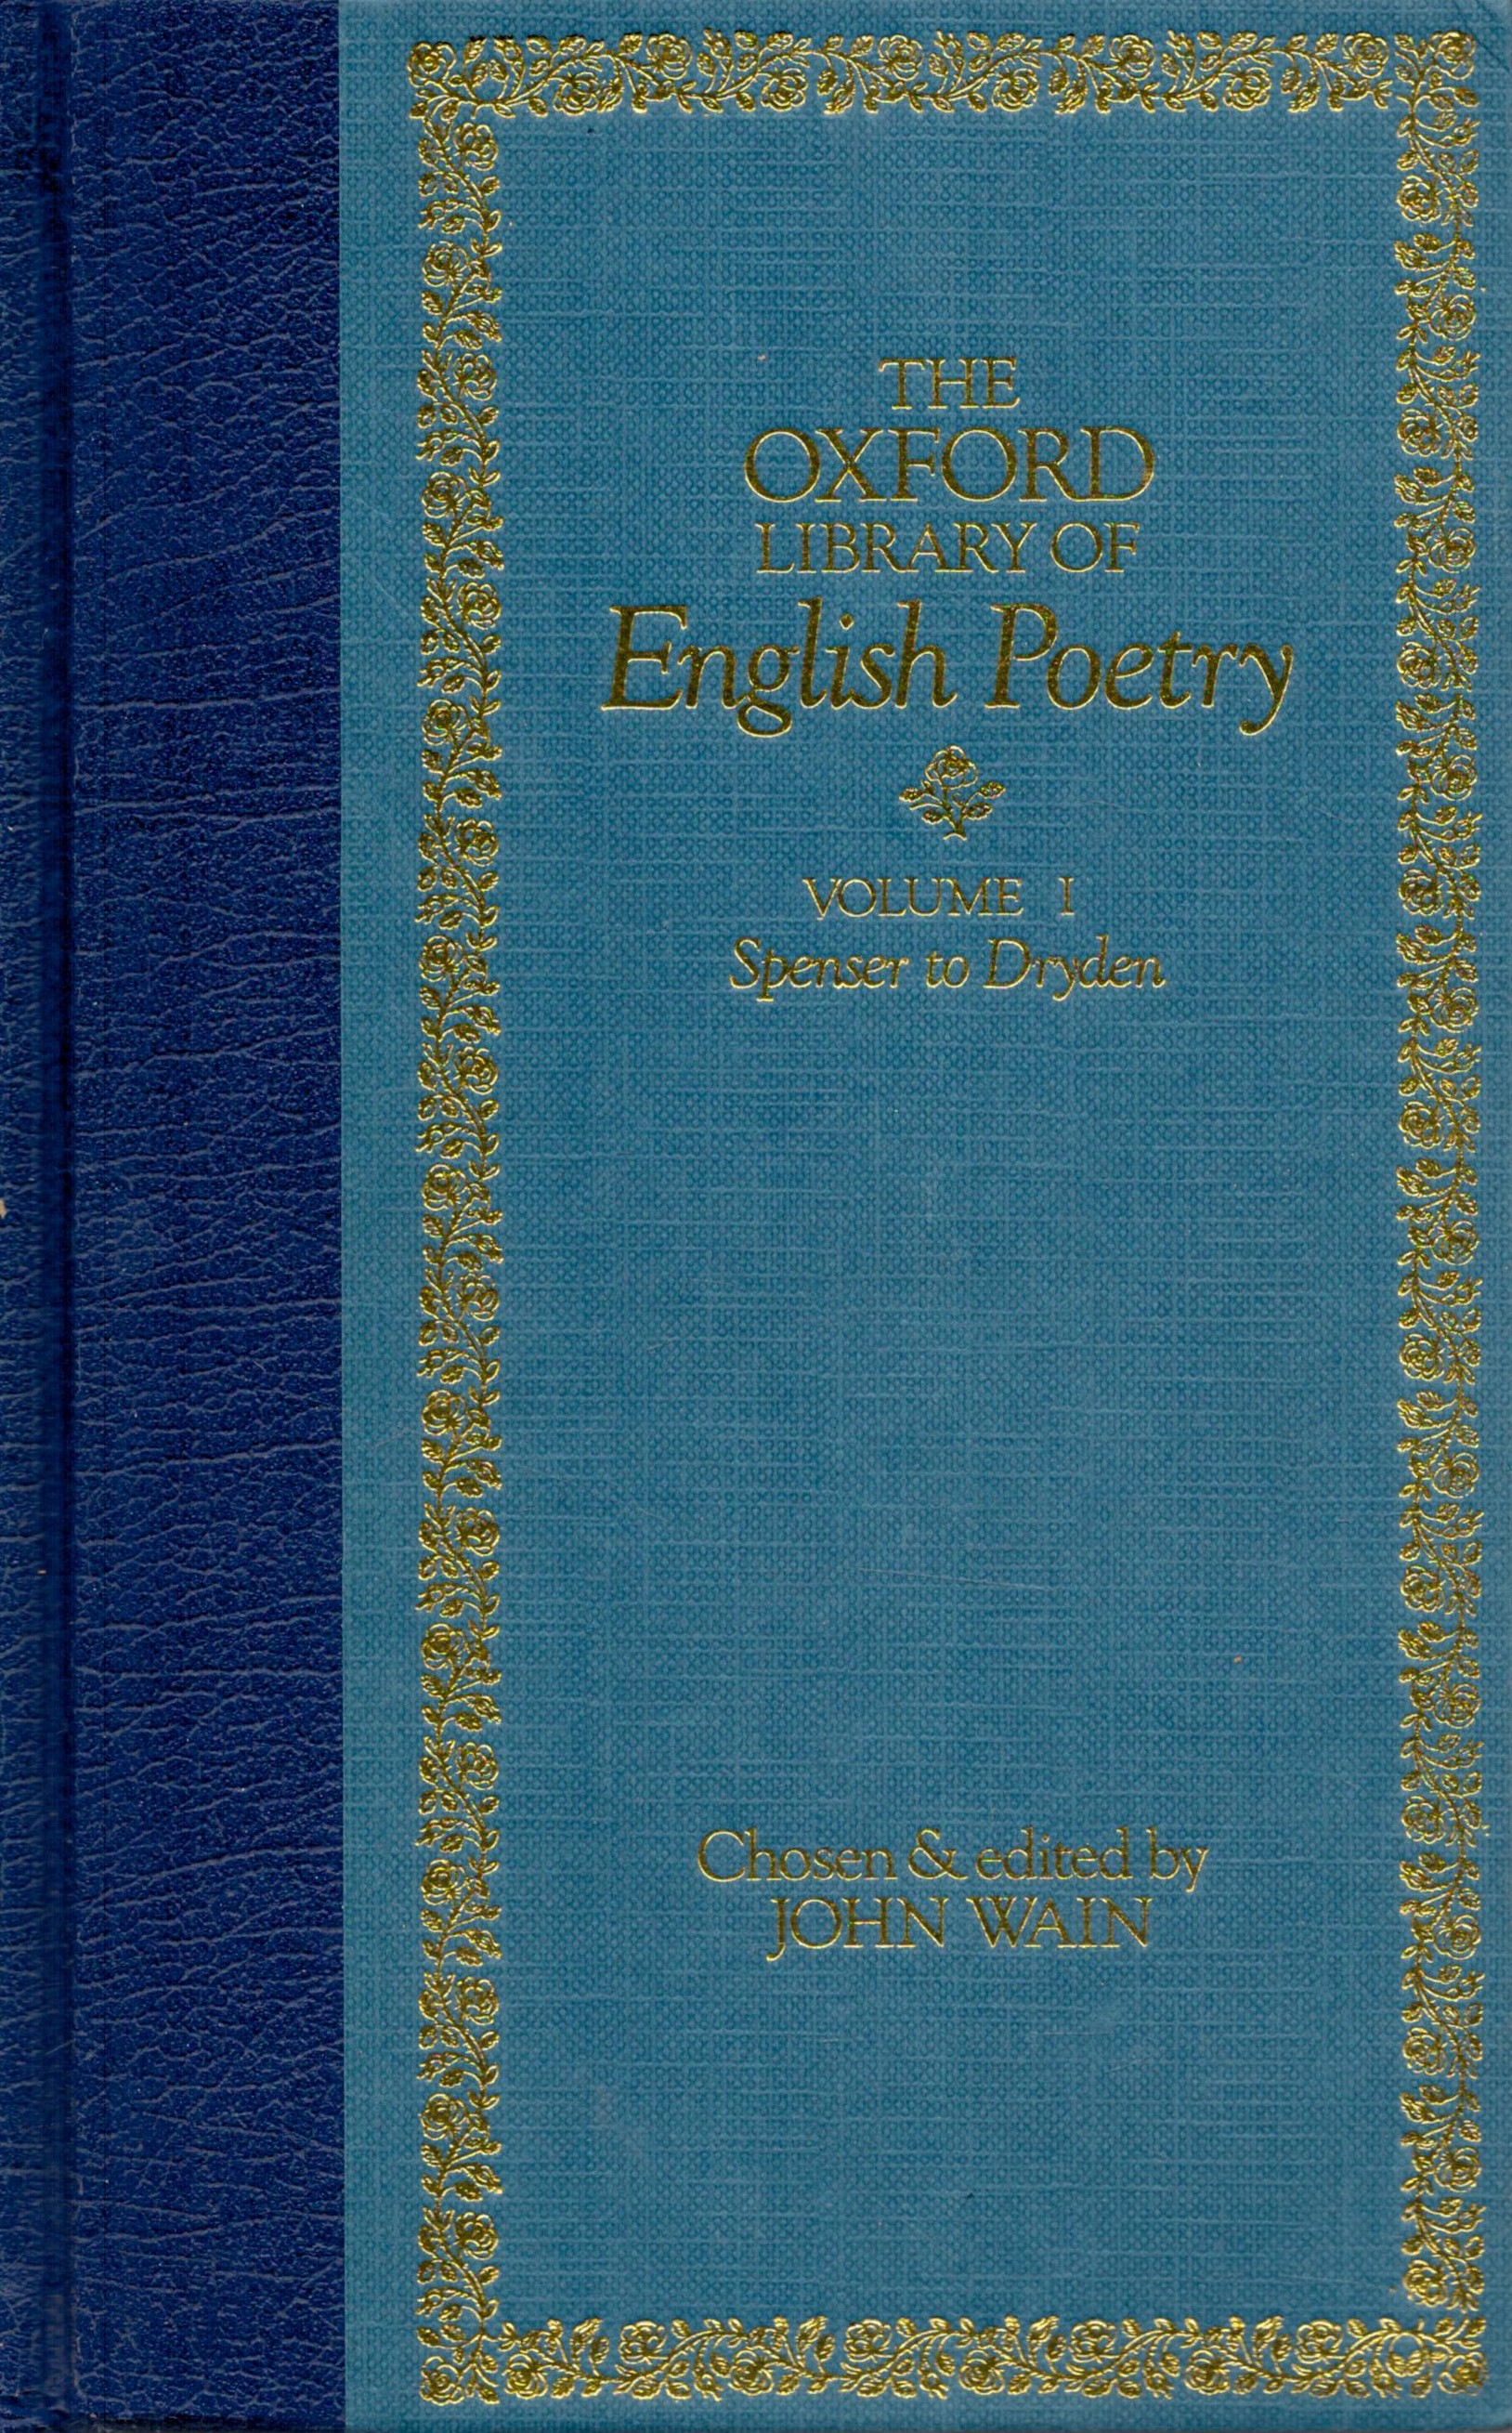 3 x Books The Oxford Library of English Poetry Edited by John Wain 1988 Book Club Edition Hardback - Image 2 of 4